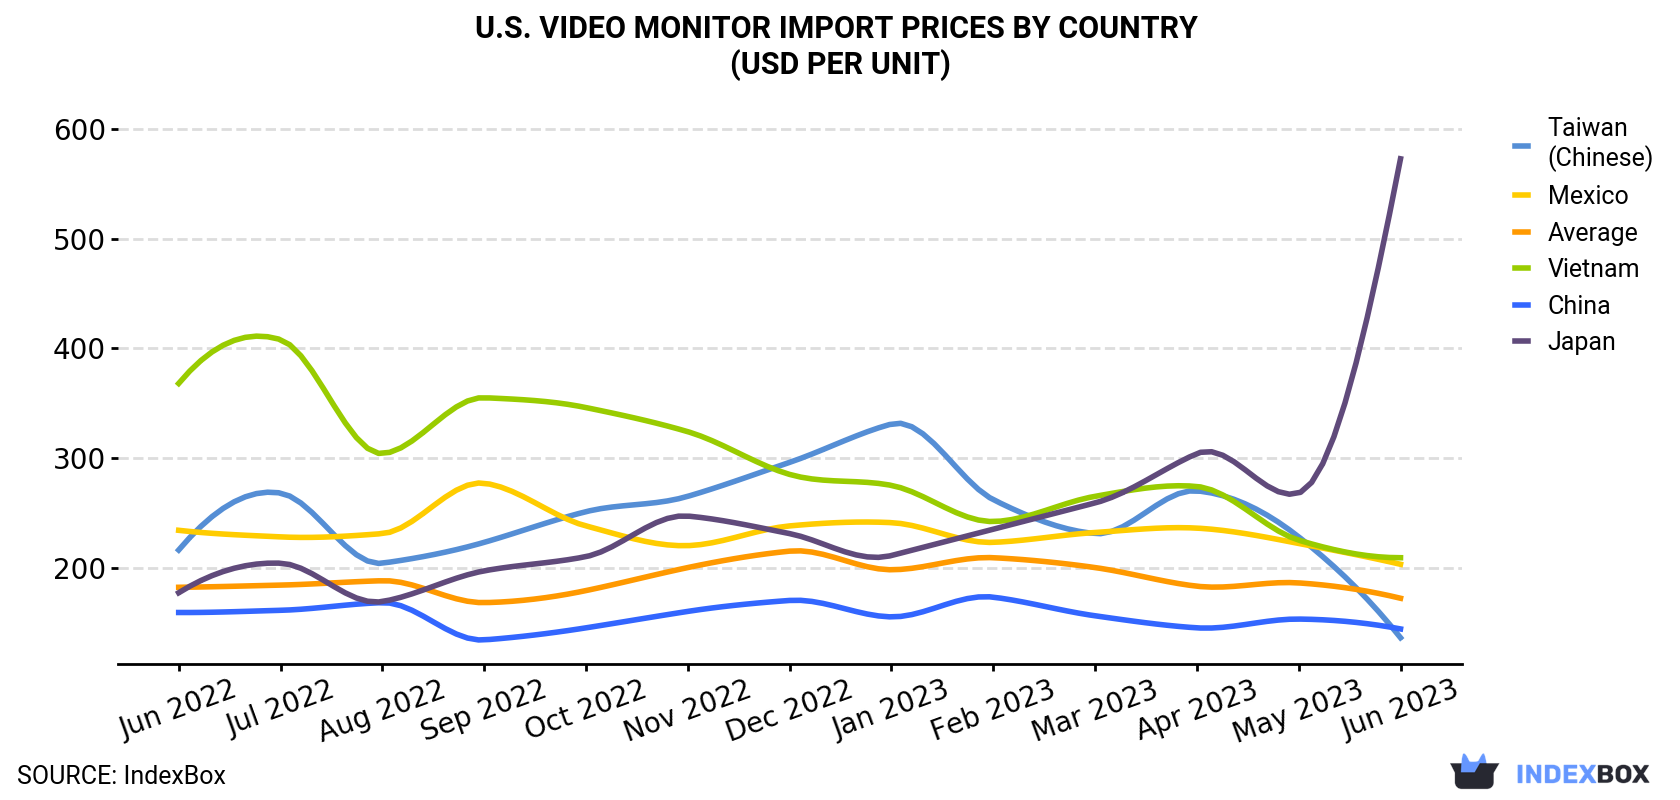 U.S. Video Monitor Import Prices By Country (USD Per Unit)